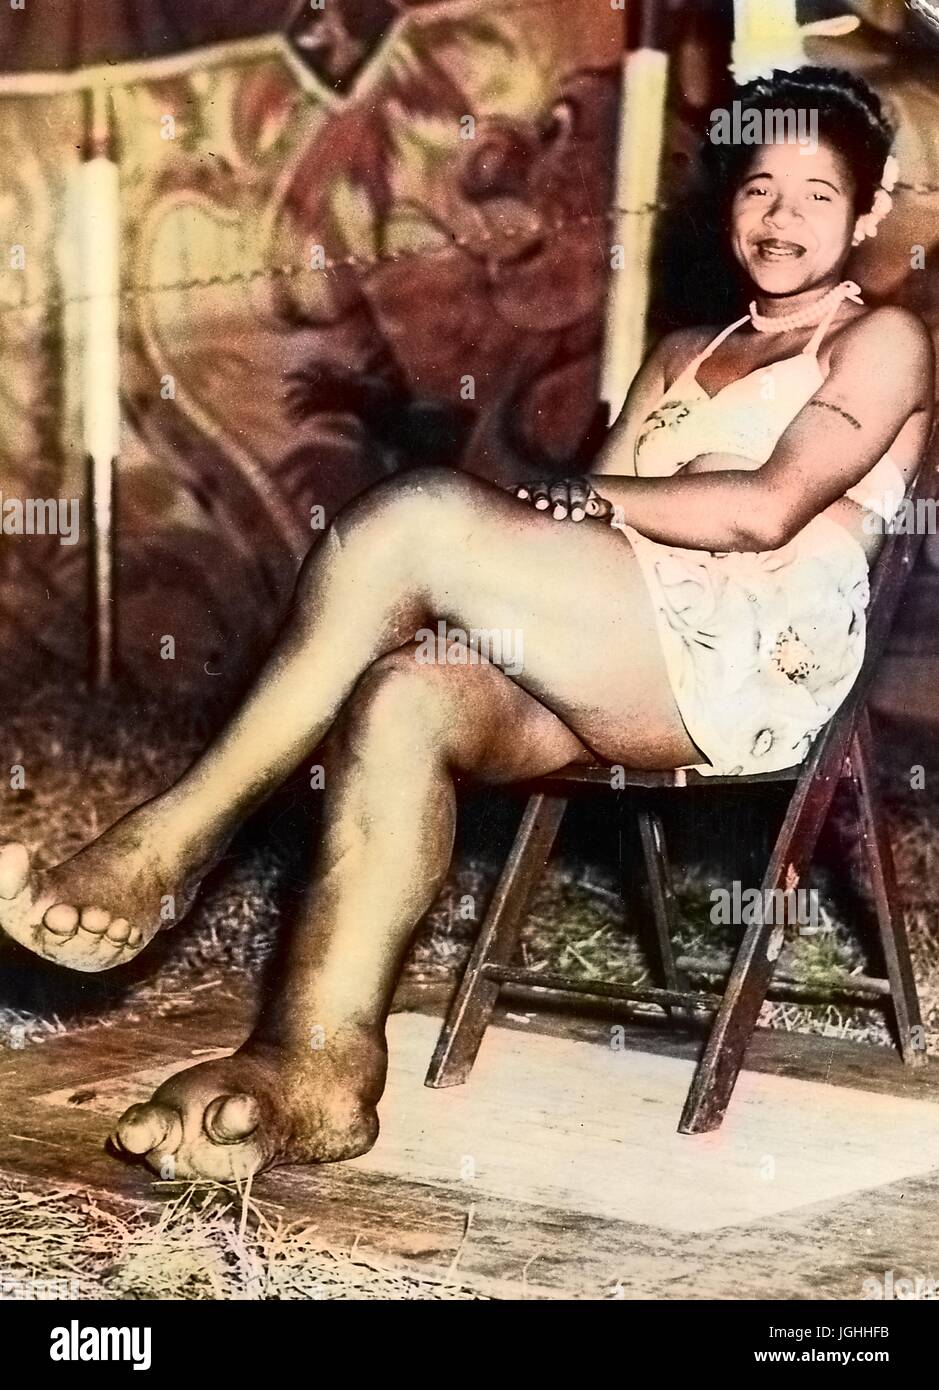 African American sideshow circus entertainer Sylvia Portis, known as Sylvia the Elephant Girl, smiling and displaying her feet, which are deformed and show signs of the disease elephantiasis, 1944. Note: Image has been digitally colorized using a modern process. Colors may not be period-accurate. Stock Photo